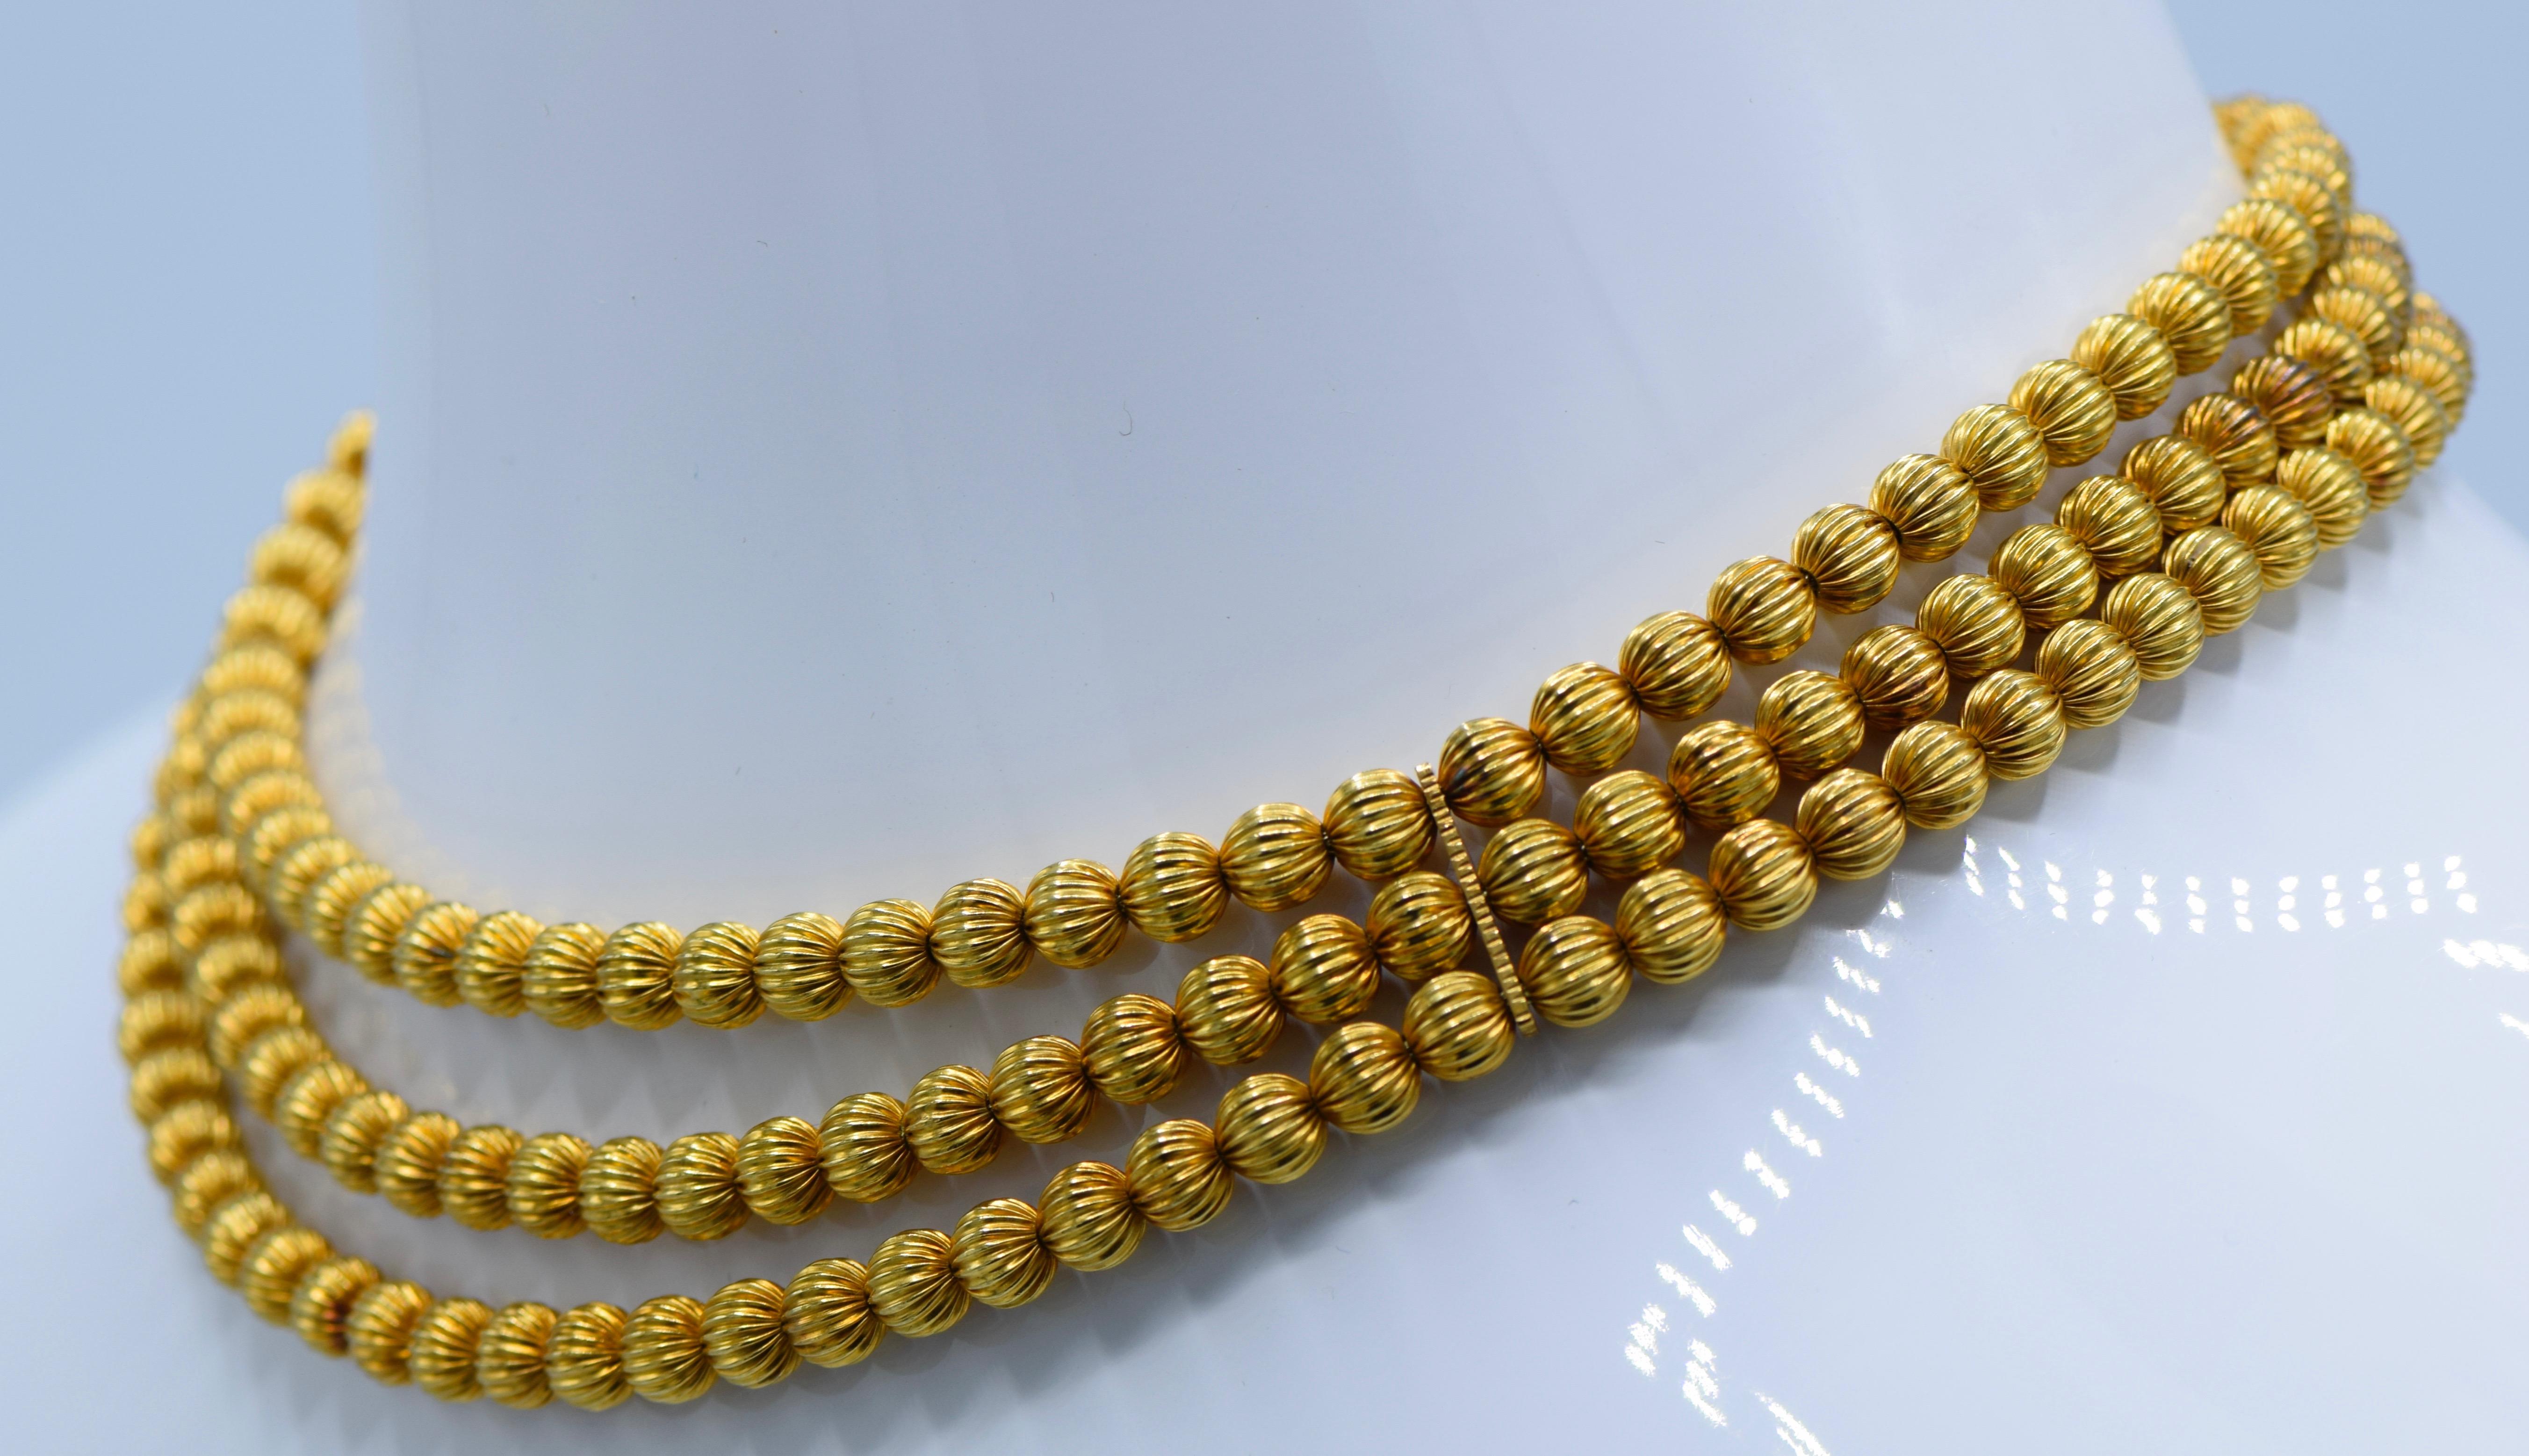 18 kt., composed of three strands of finely ribbed gold beads, signed Ilias Lalaounis, Greece, with maker's mark, 
approximately 64 dwts. 

Length 16 3/4 inches. 

Rich yellow gold color. Some of beads of section near female end of clasp of lighter